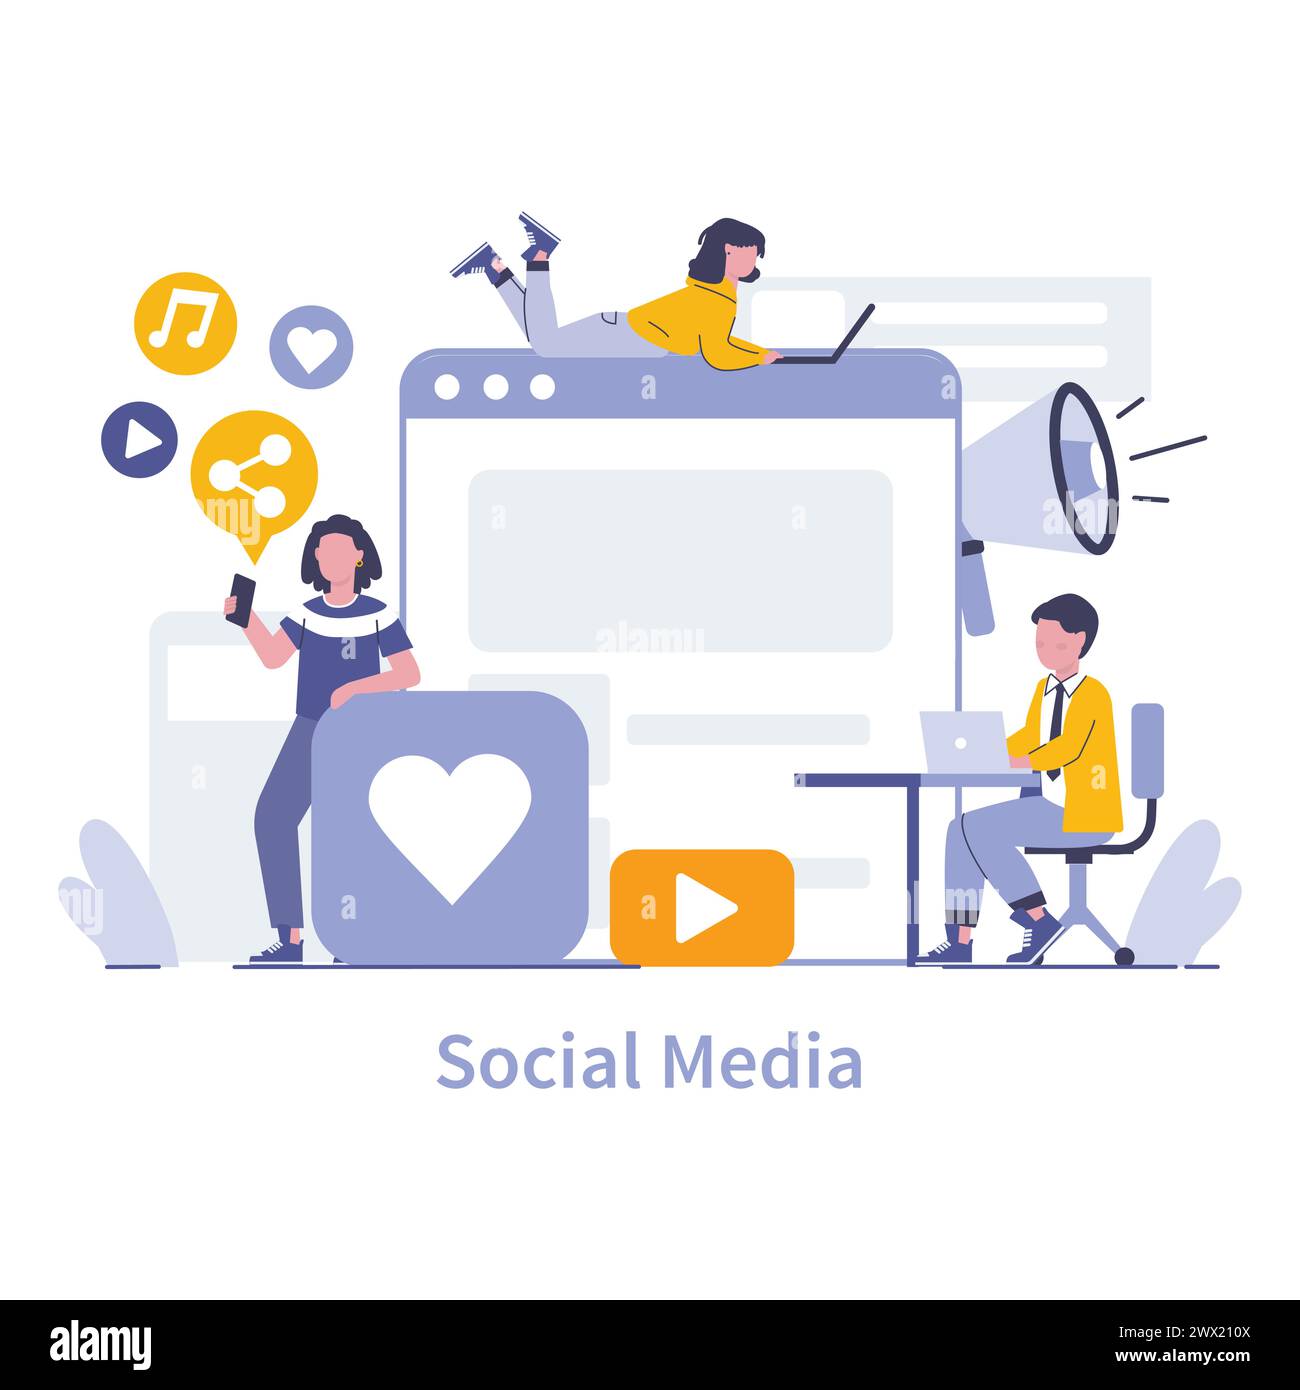 Social Media concept. Interactive online platforms for news sharing and discussions on current events. Digital community engagement and connection. Vector illustration. Stock Vector